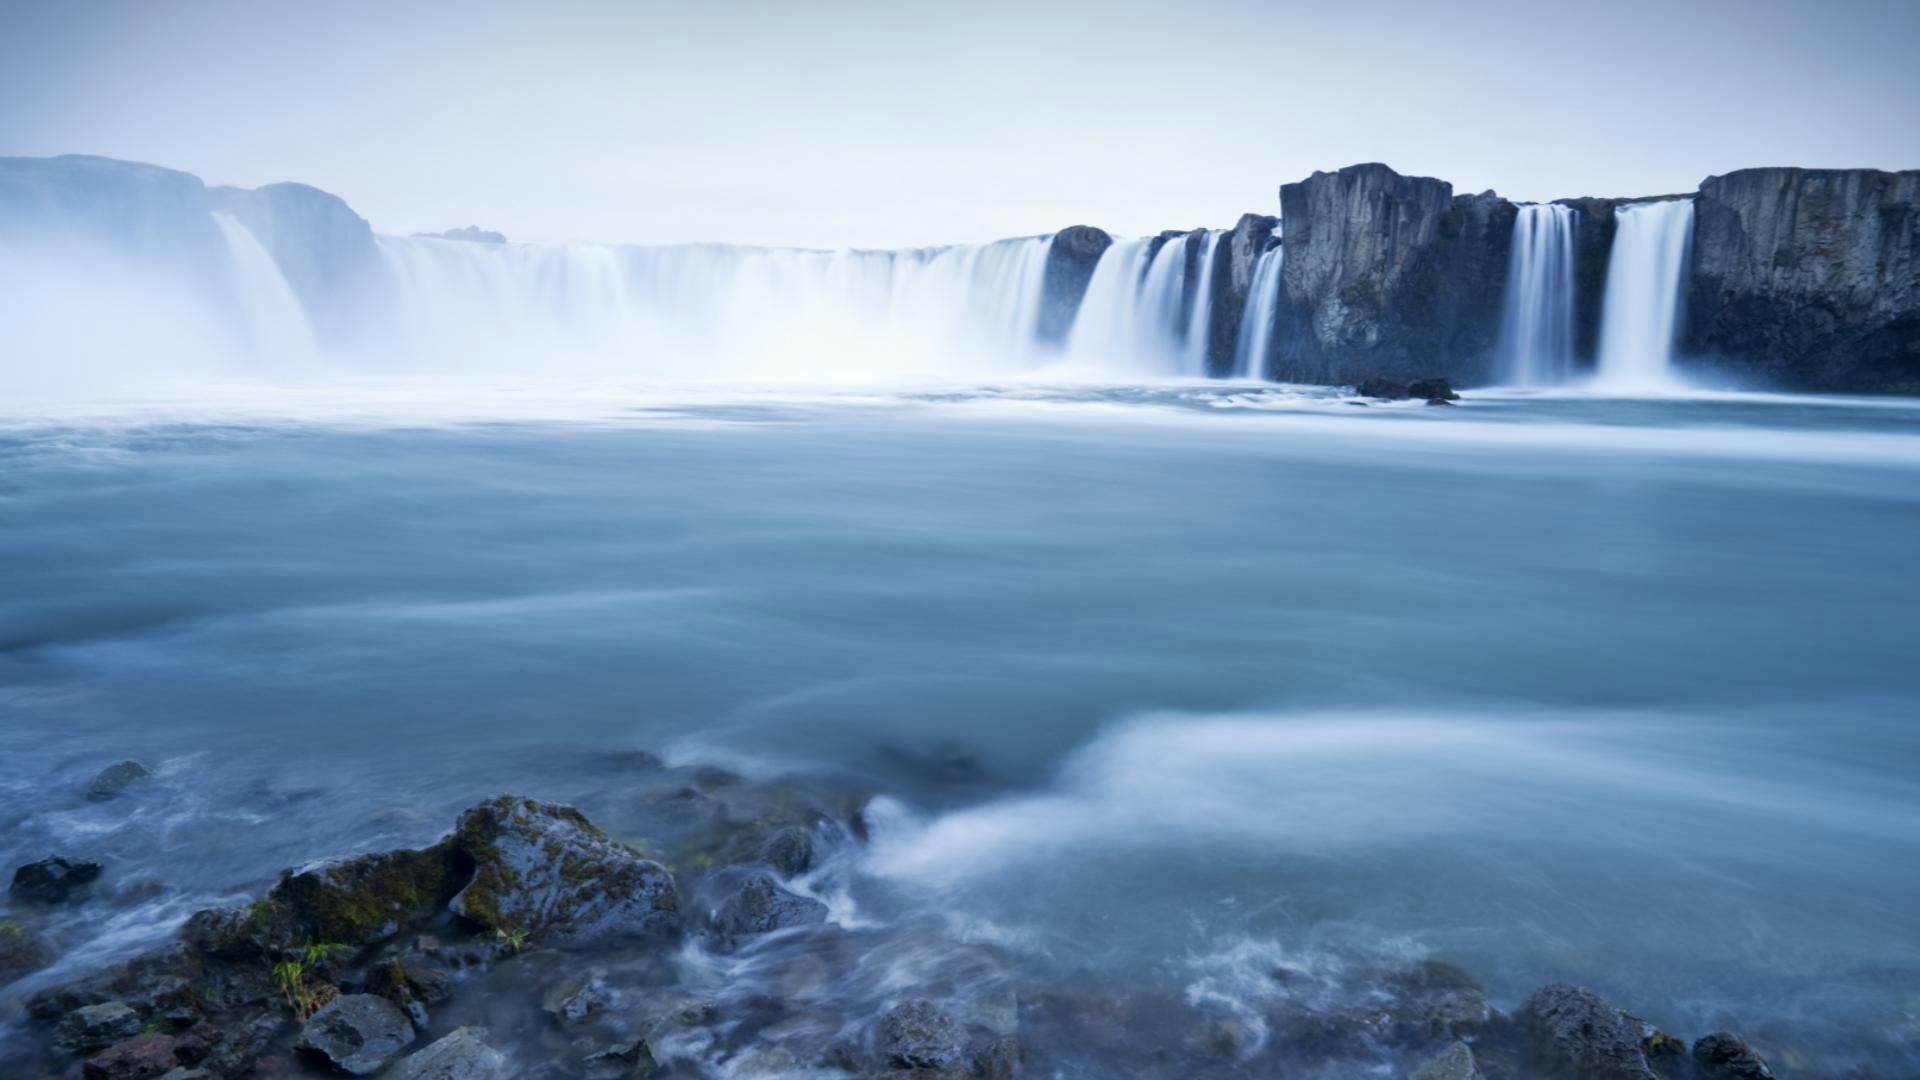 Just back from: North Iceland - Lonely Planet Video